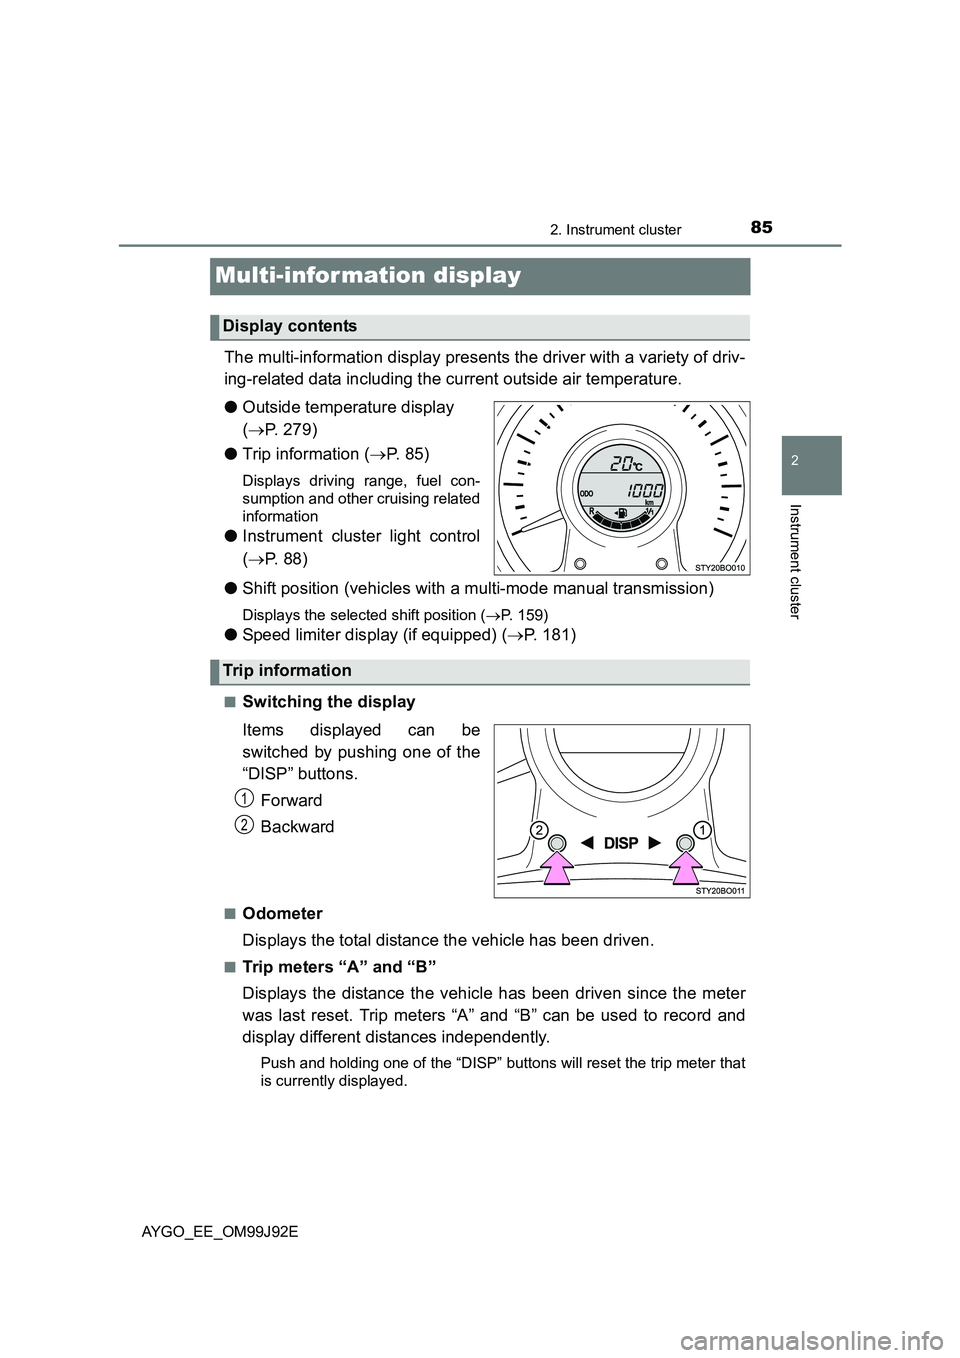 TOYOTA AYGO 2015  Owners Manual (in English) 85
2
2. Instrument cluster
Instrument cluster
AYGO_EE_OM99J92E
Multi-information display
The multi-information display presents the driver with a variety of driv- 
ing-related data including the curre